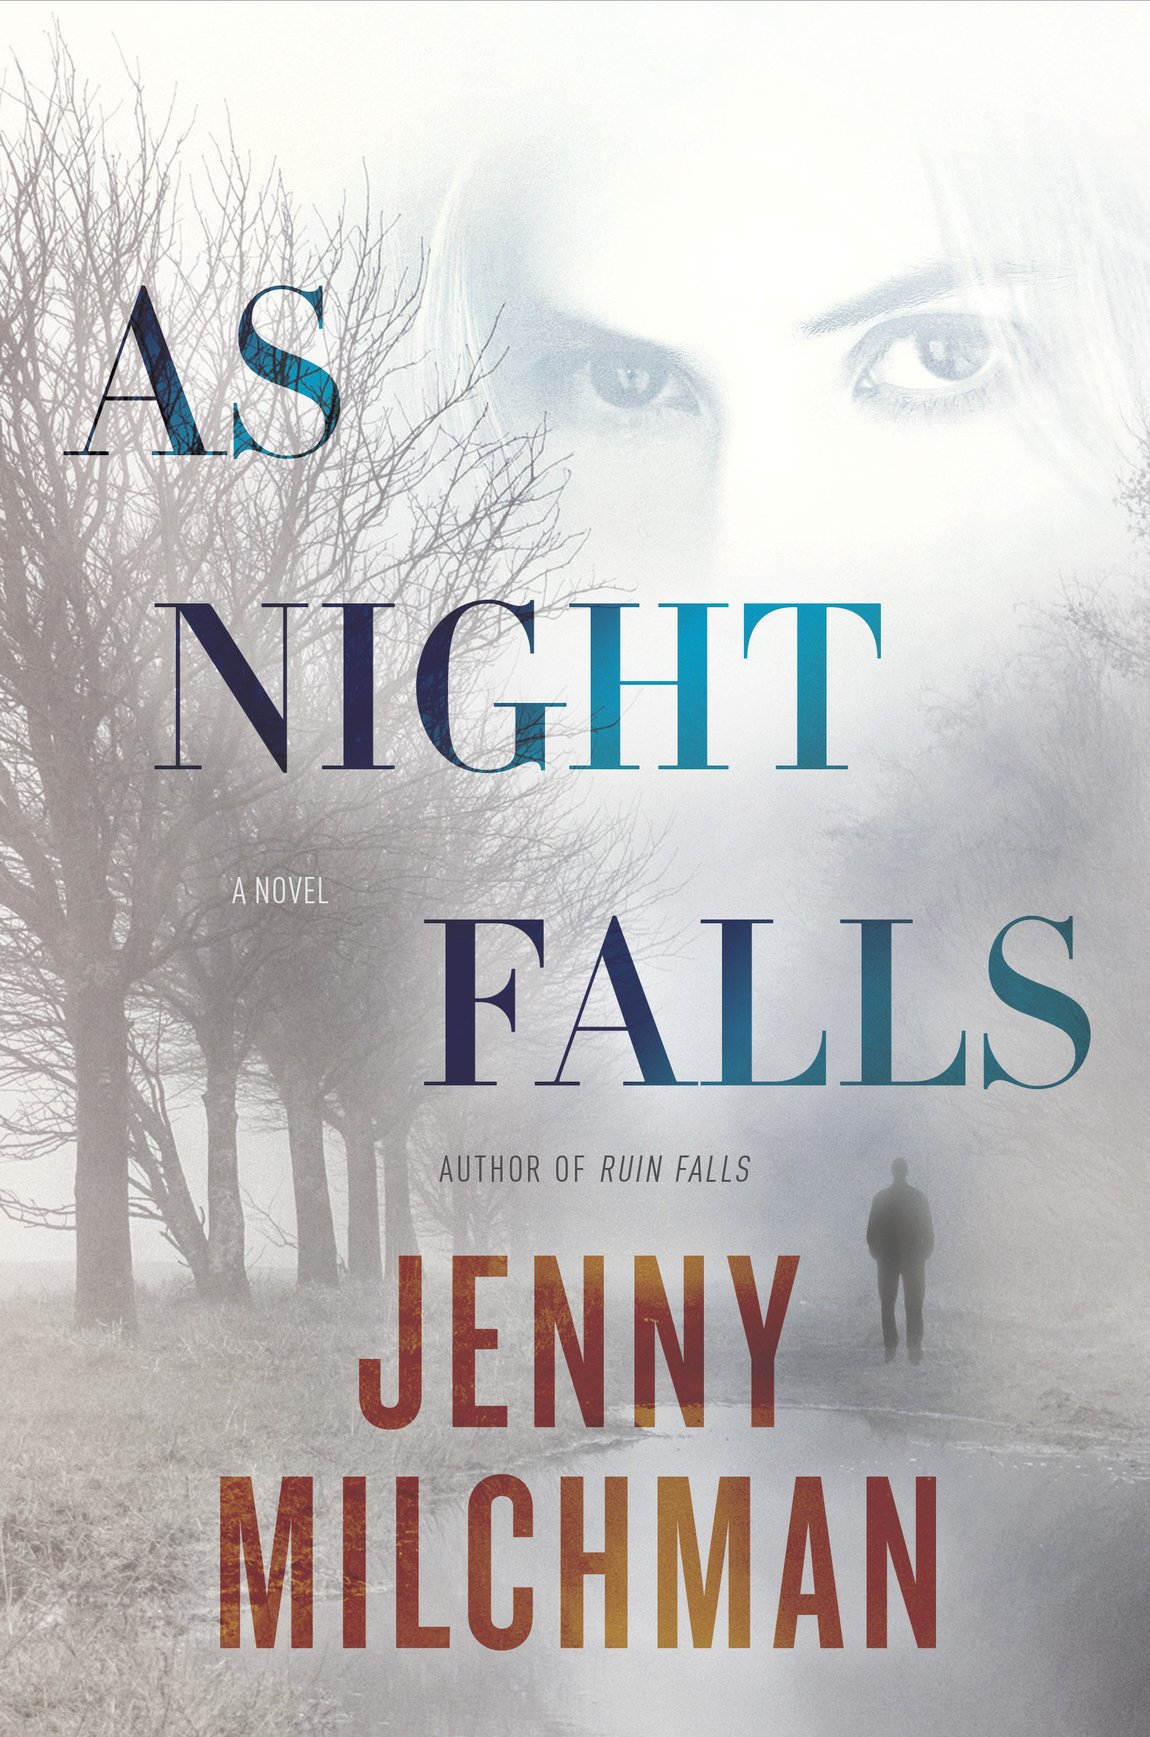 As Night Falls (2015) by Jenny Milchman